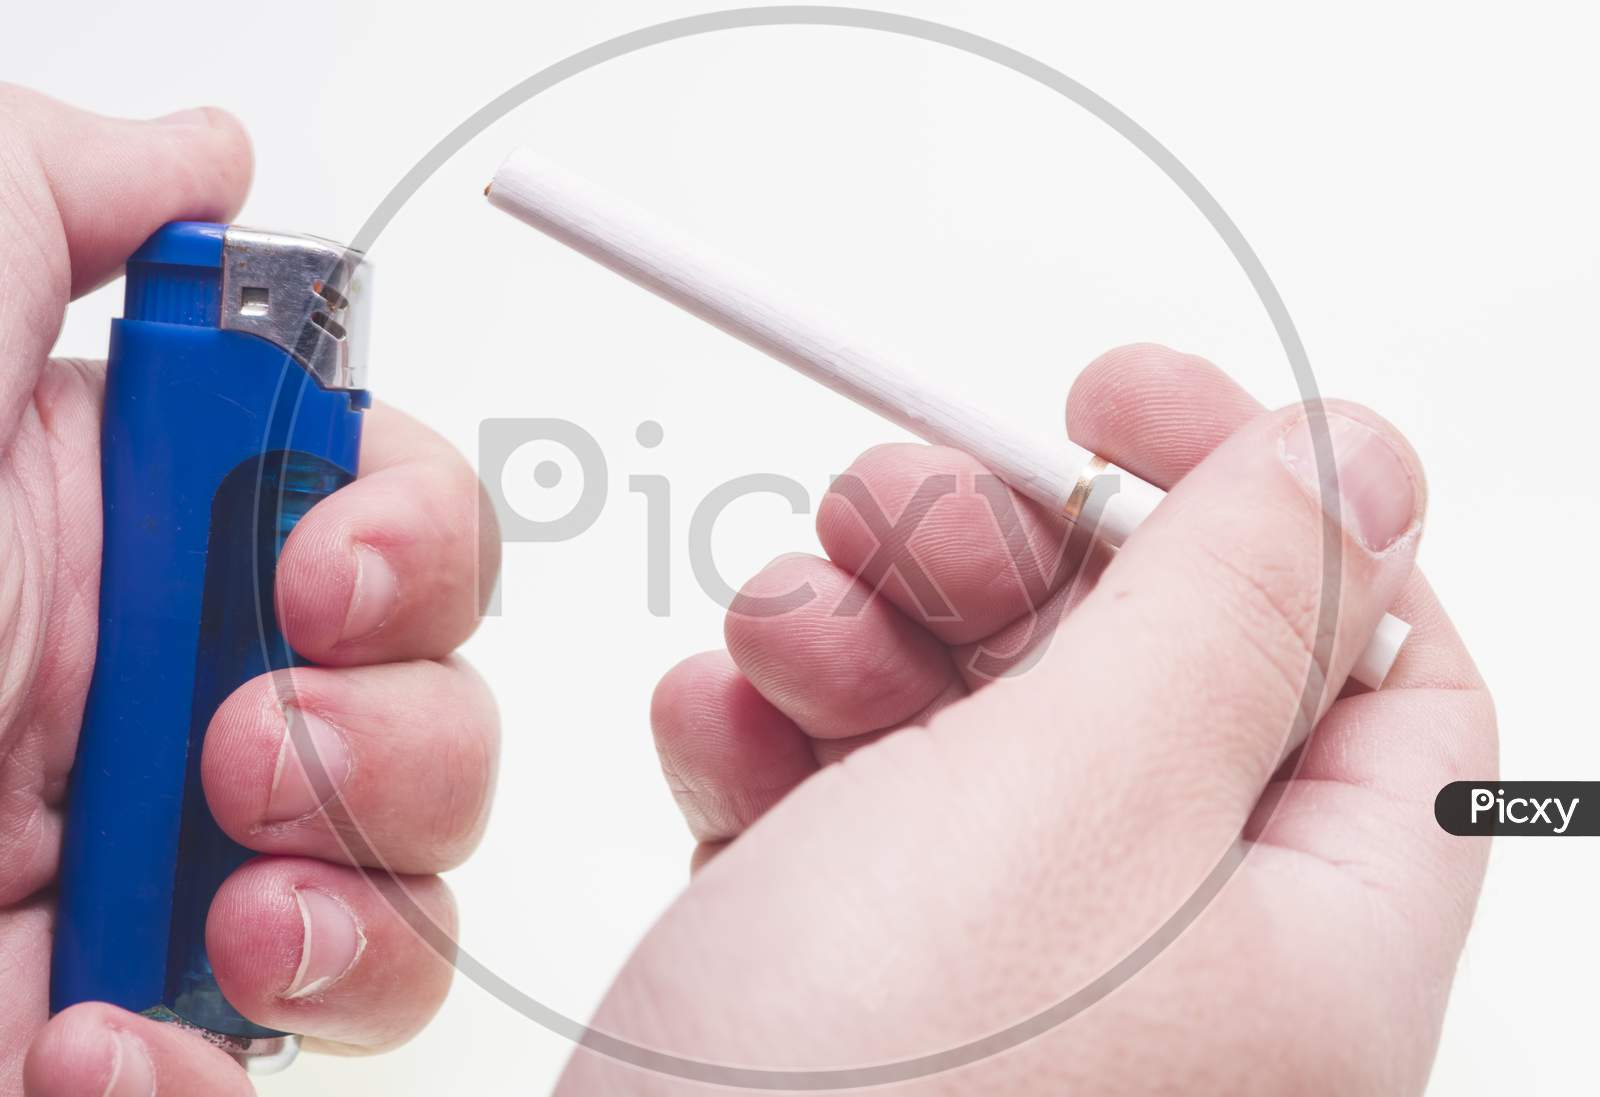 Lighter In Hand With Cigarette